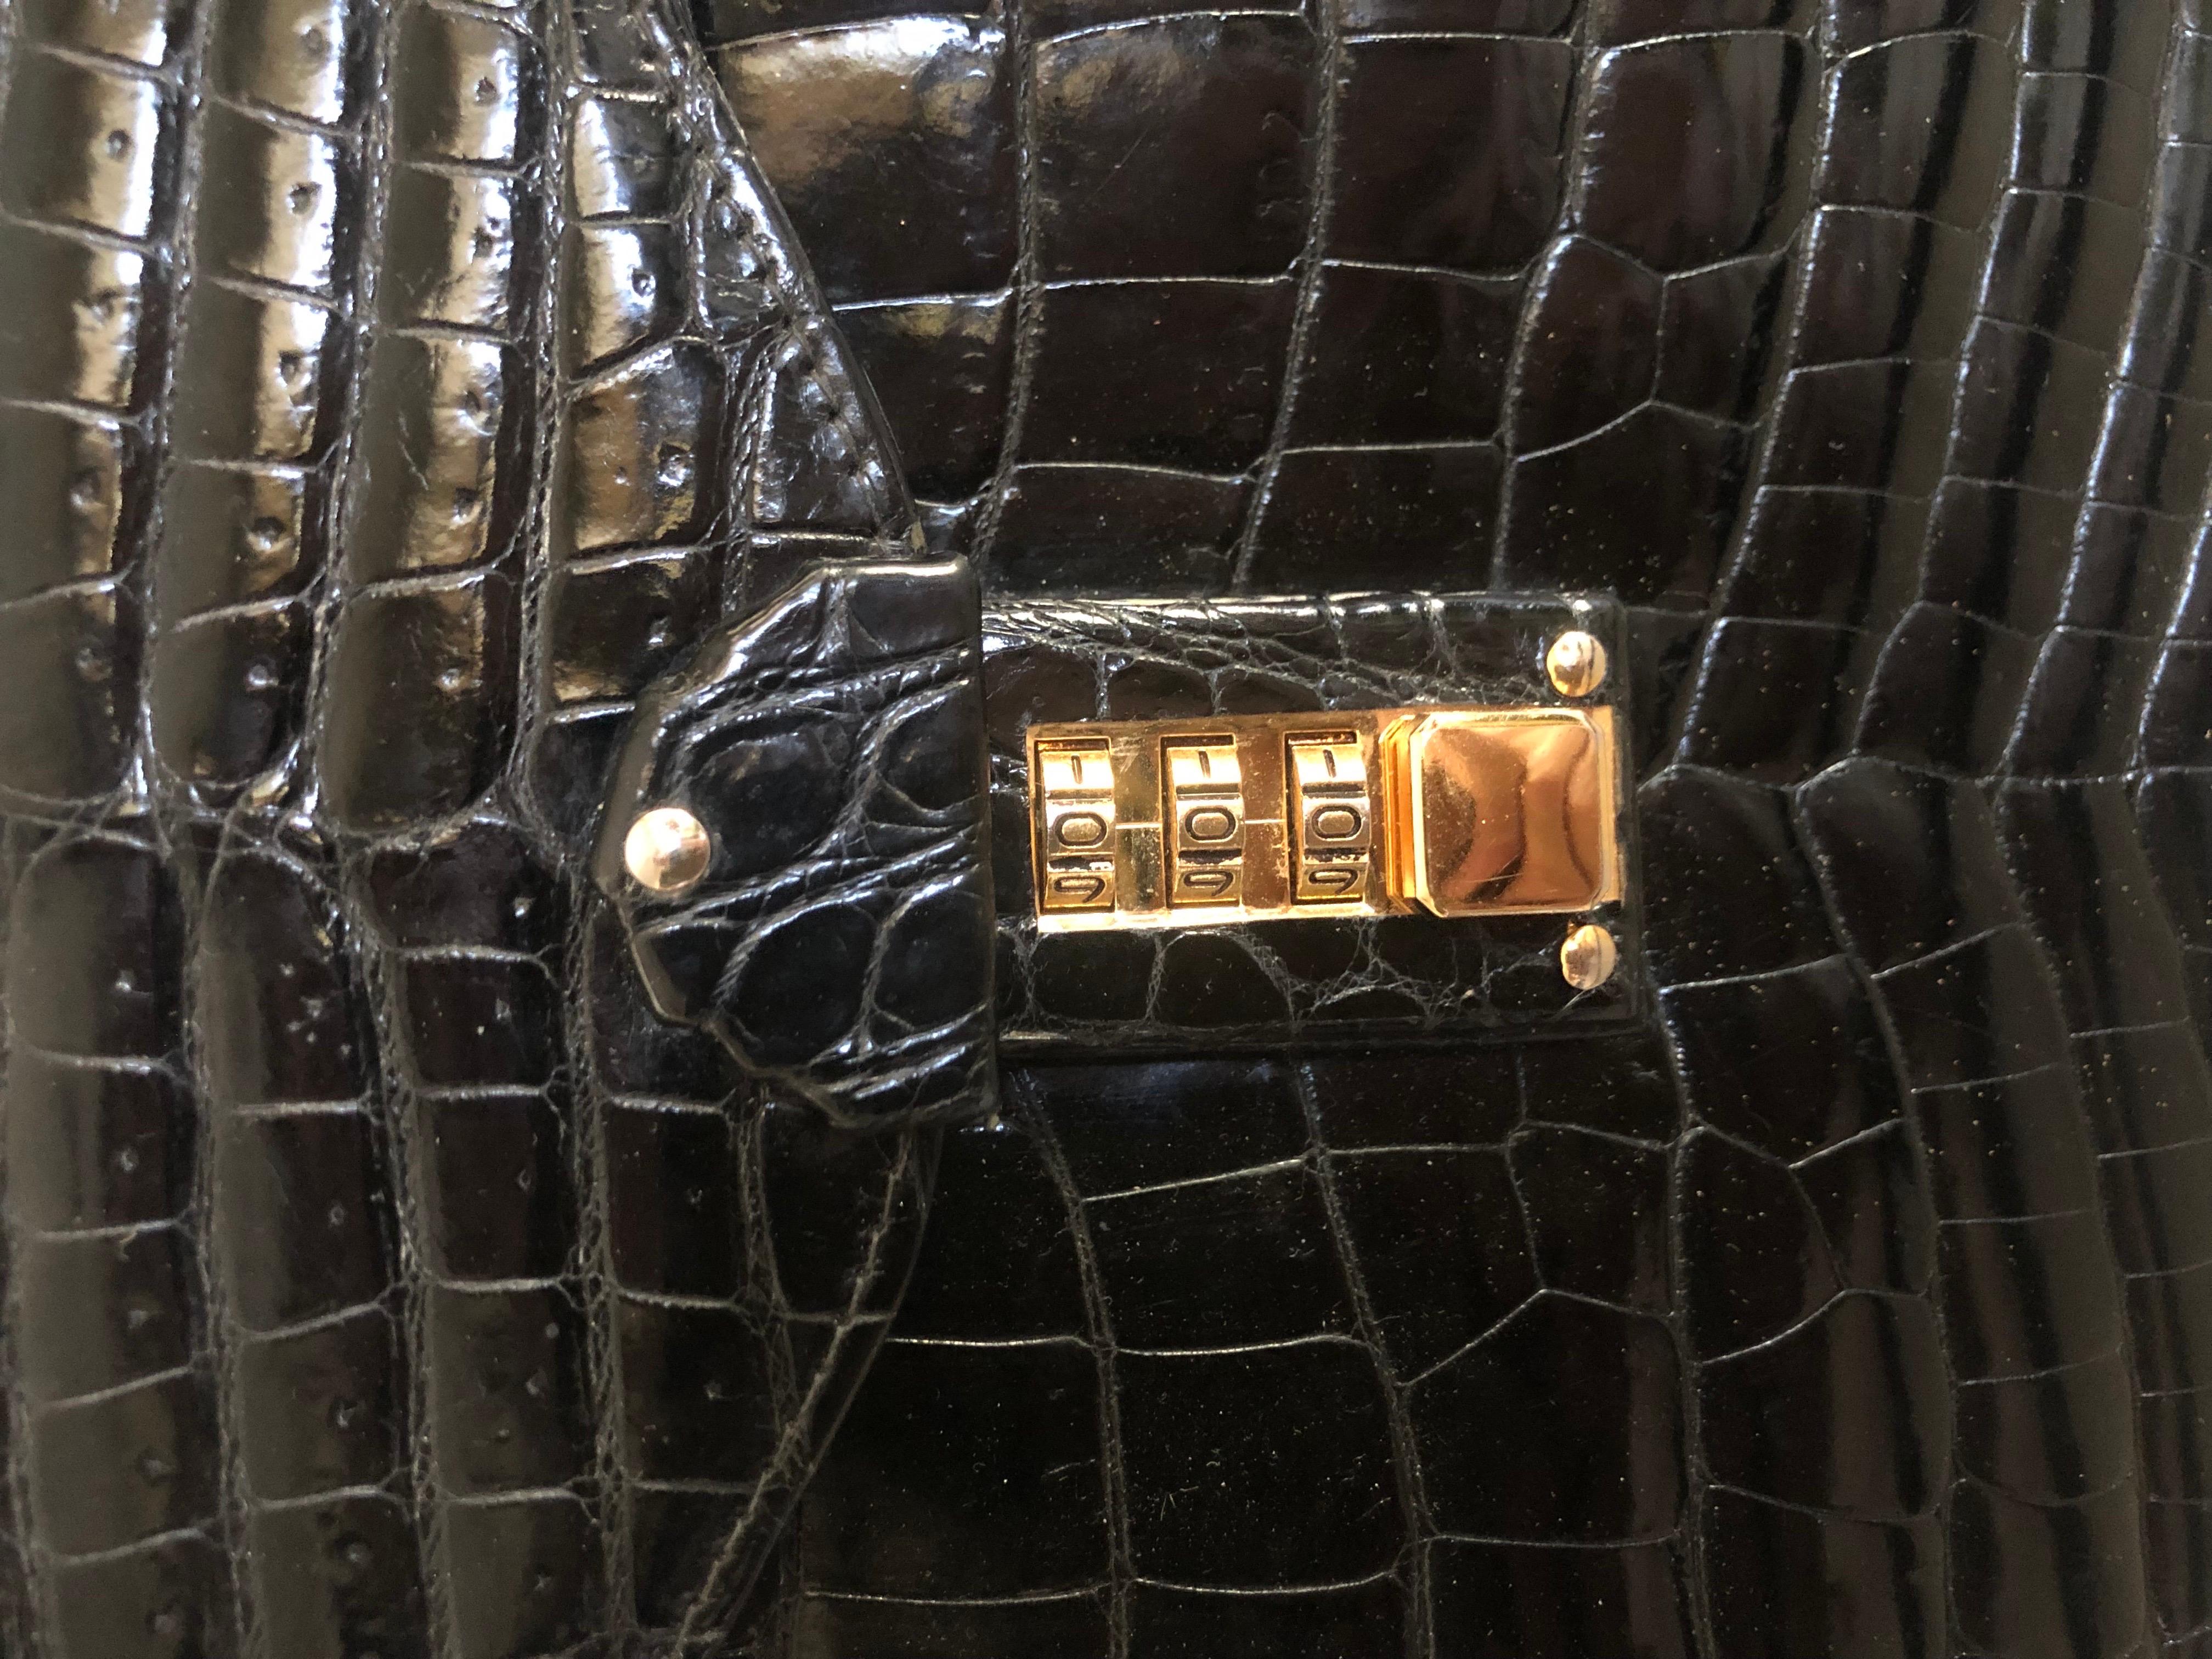 This very chic handbag was purchased in Milan Italy in the 80s at Isanti. and has very little use. It looks like Alligator but it’s made of high-quality Italian black patent leather. Beautiful classic shape with amazing gold hardware. The closure is